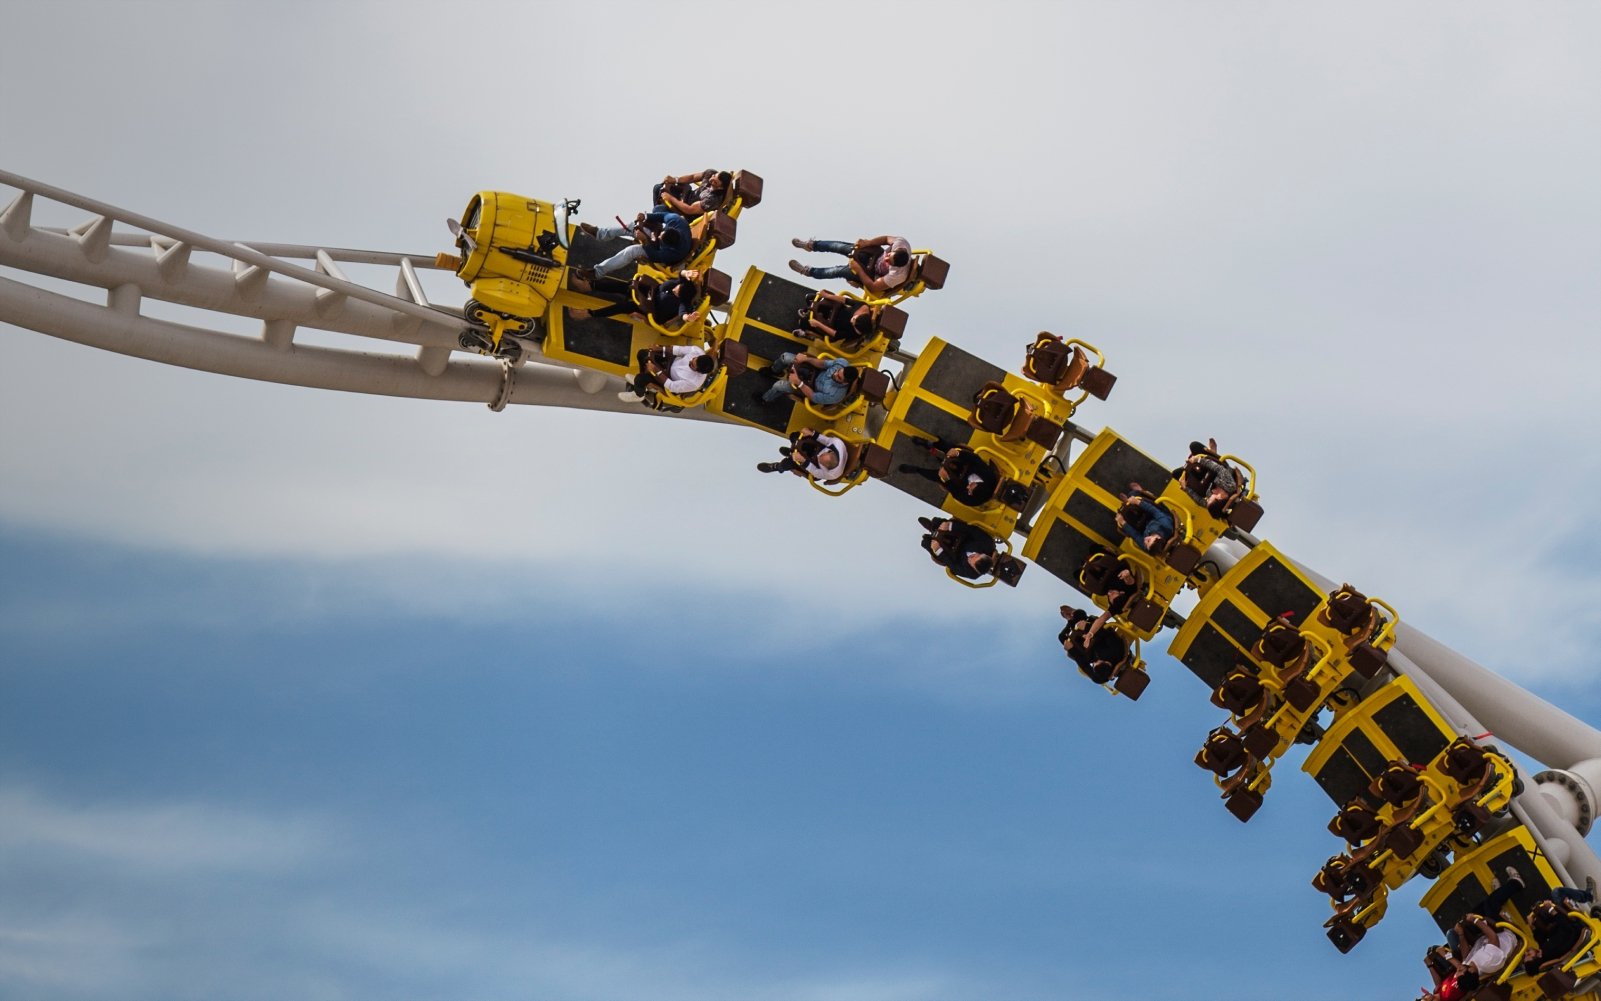 The upside-down loop of a yellow rollercoaster in Abu Dhabi